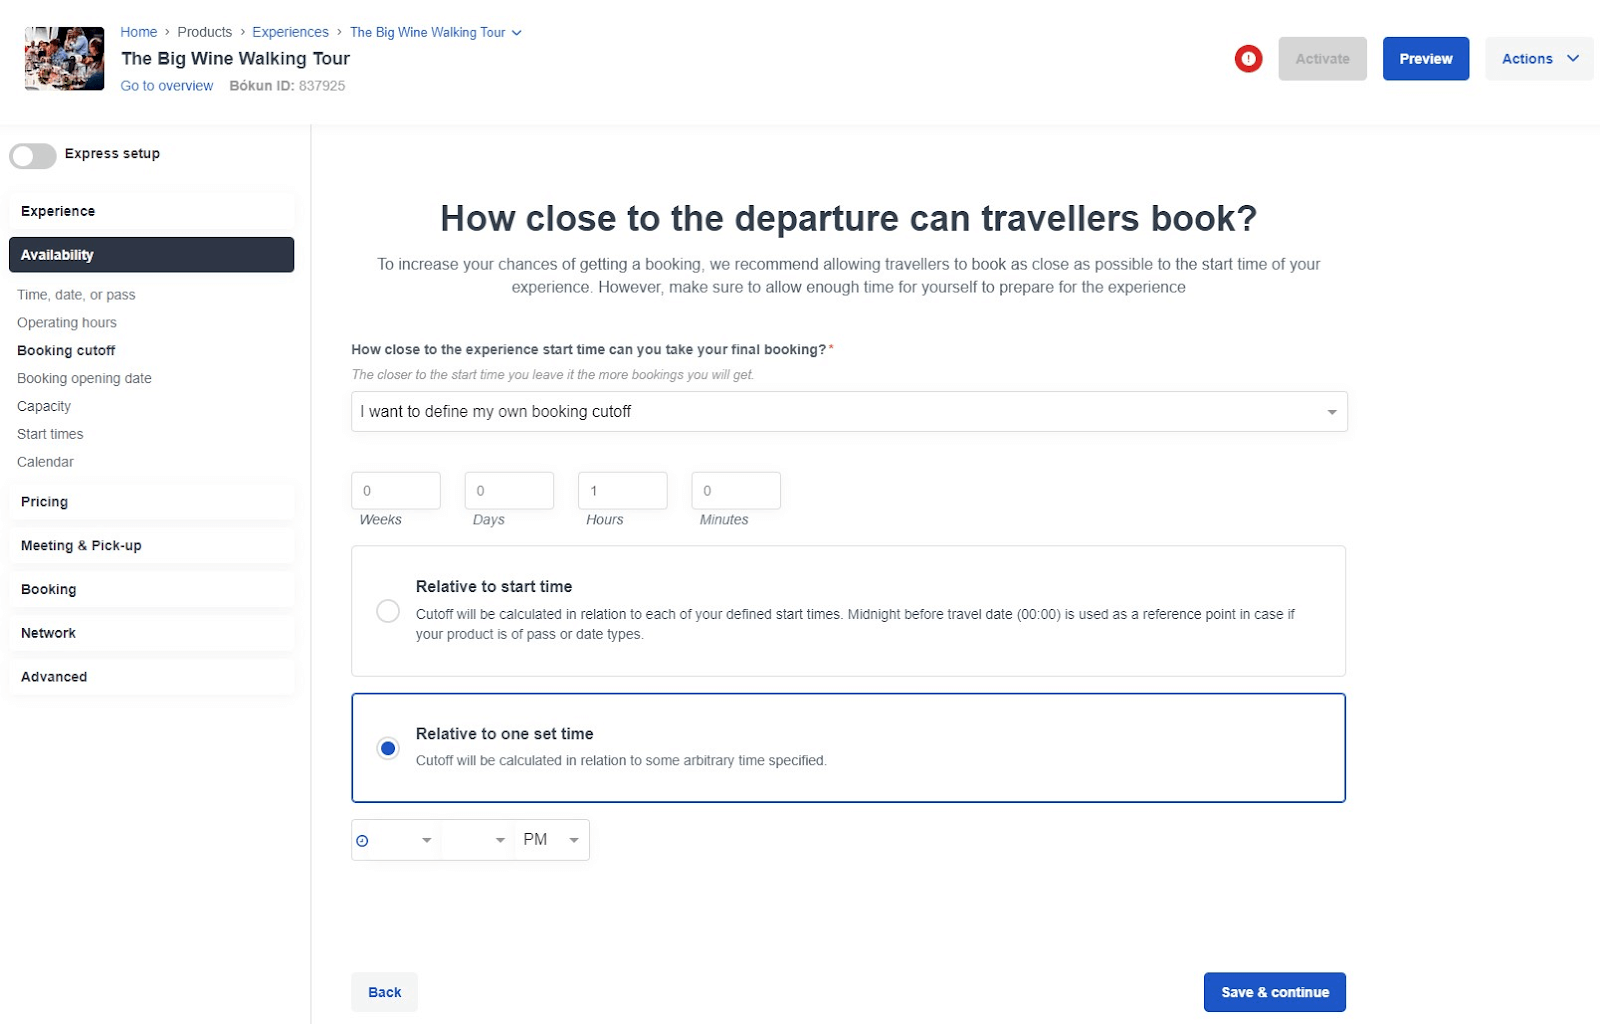 How close to the departure can travellers book?